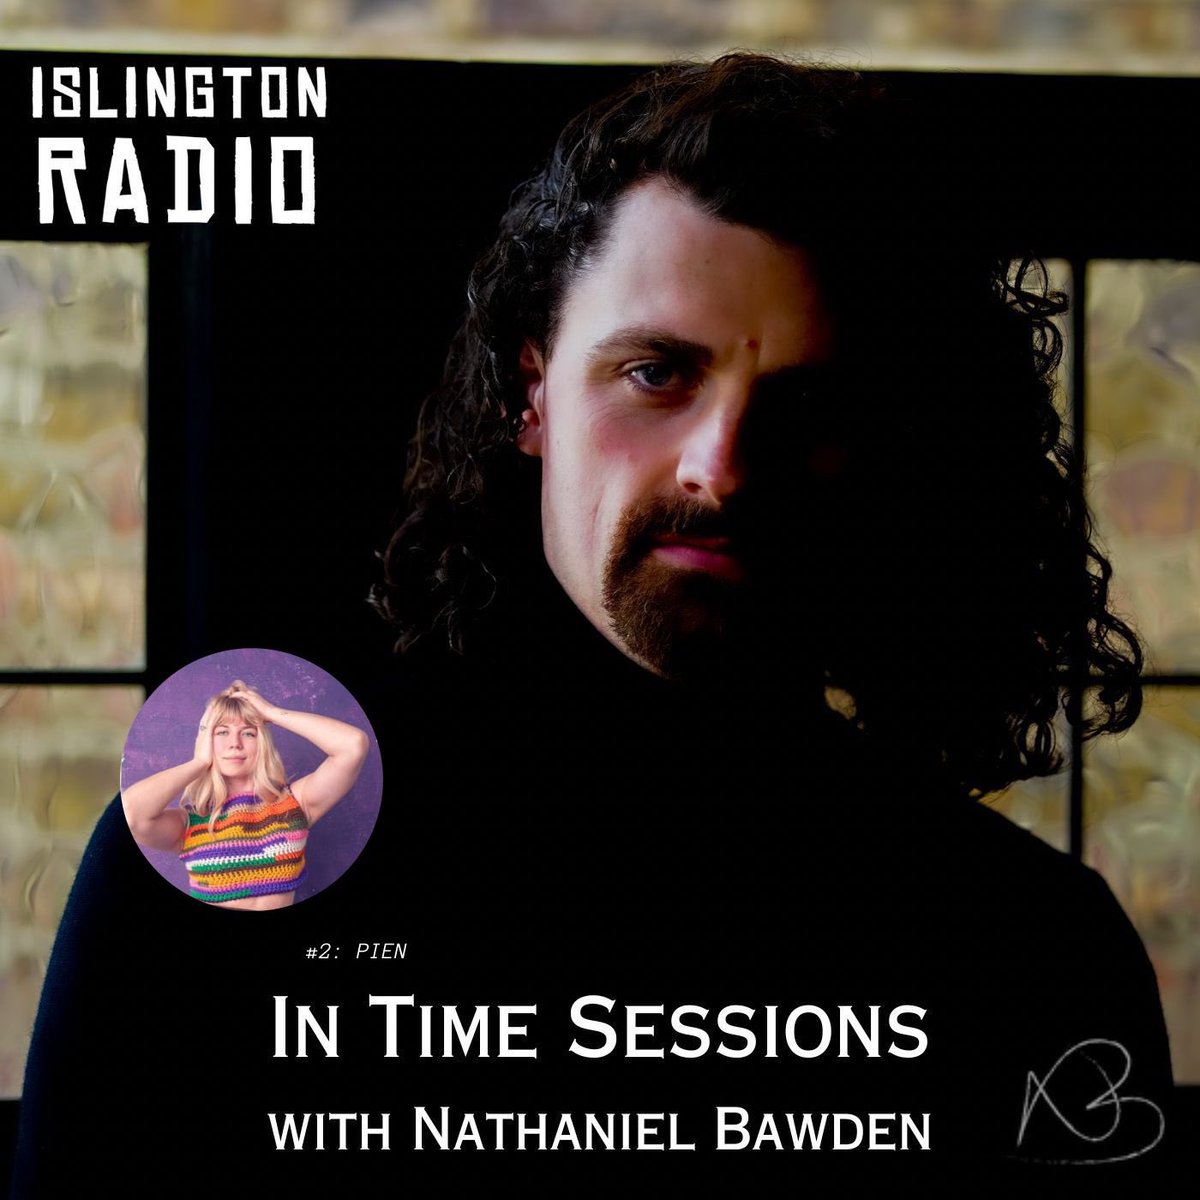 ‘In Time Sessions - Episode 2’ is out right now on @IslingtonRadio, featuring special guest PIEN. Listen: mixcloud.com/IslingtonRadio… 📻 We talk all things re: the creative journey, 🇳🇱🇳🇱 & there’s some great live tracks at the end. Enjoy! #Radio #RadioShow